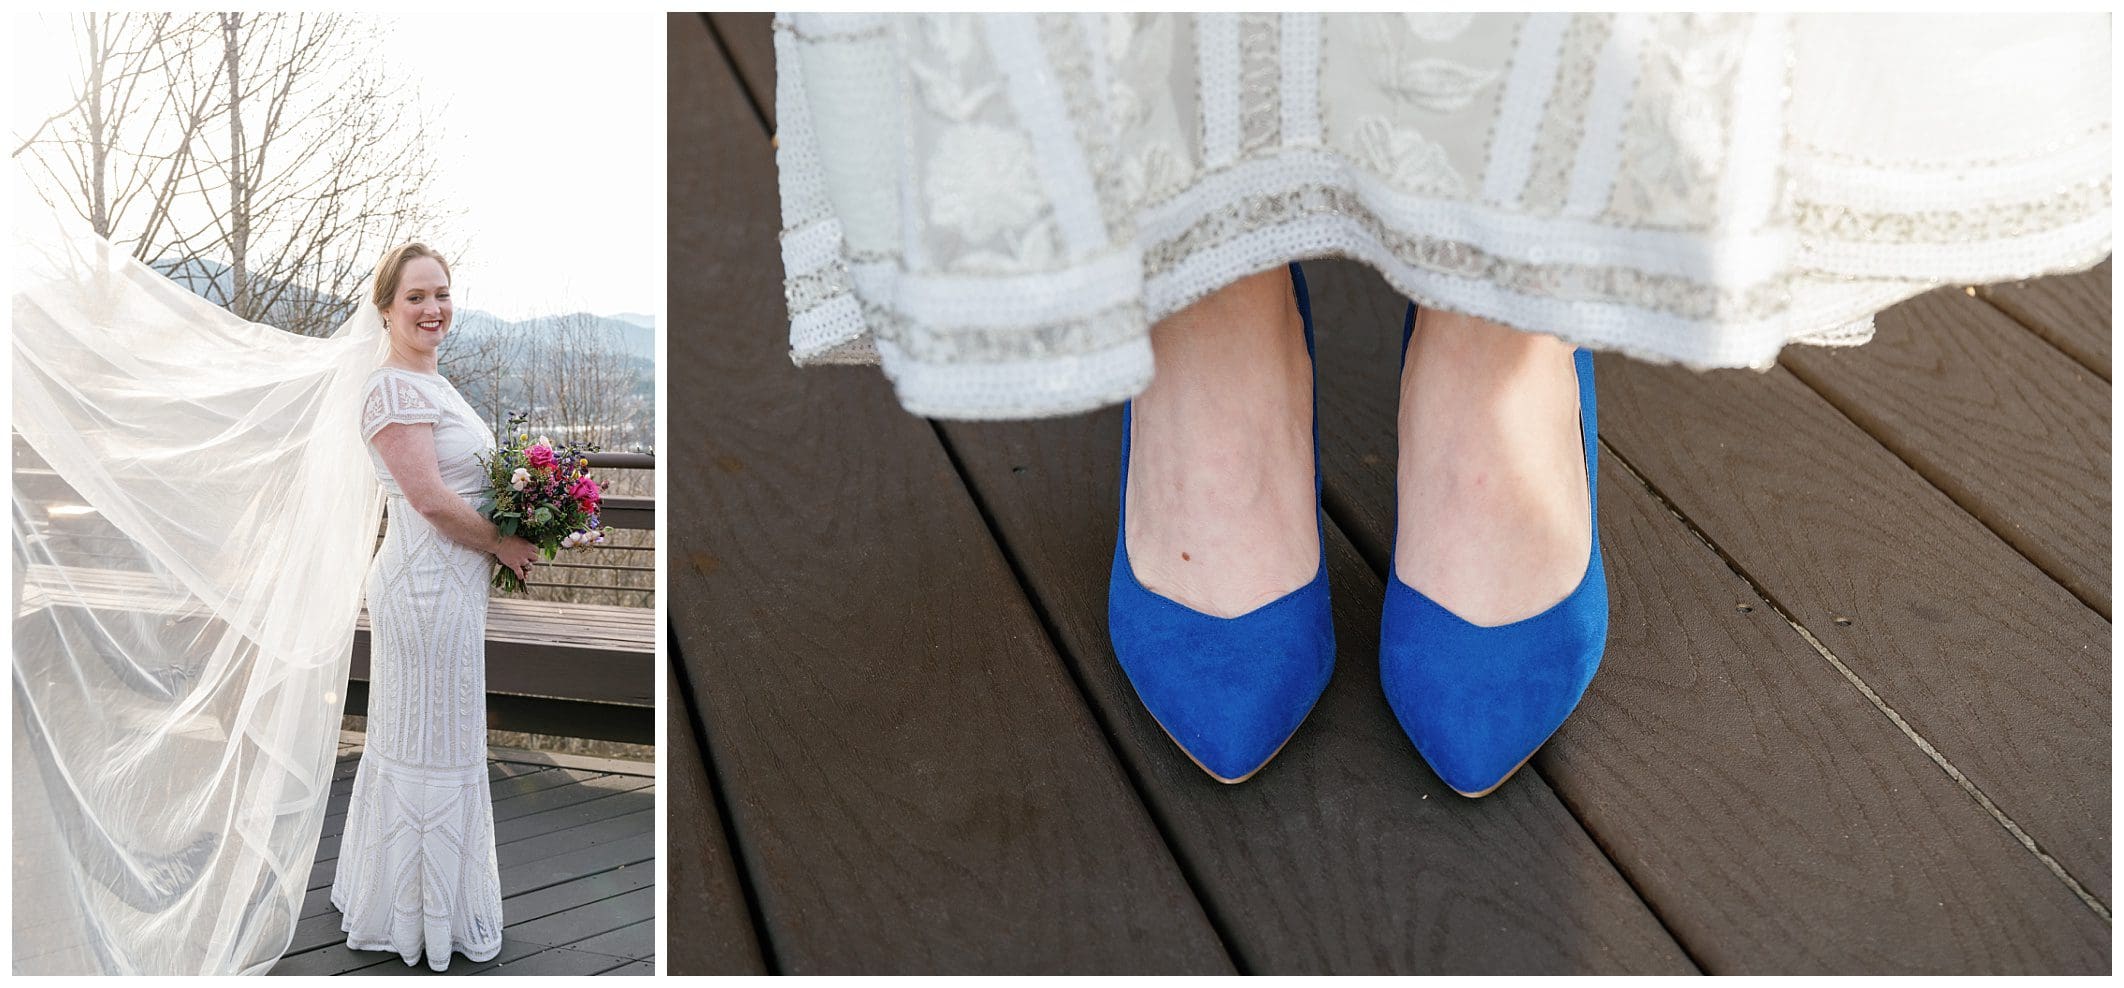 A bride wearing blue shoes and a veil on a deck.